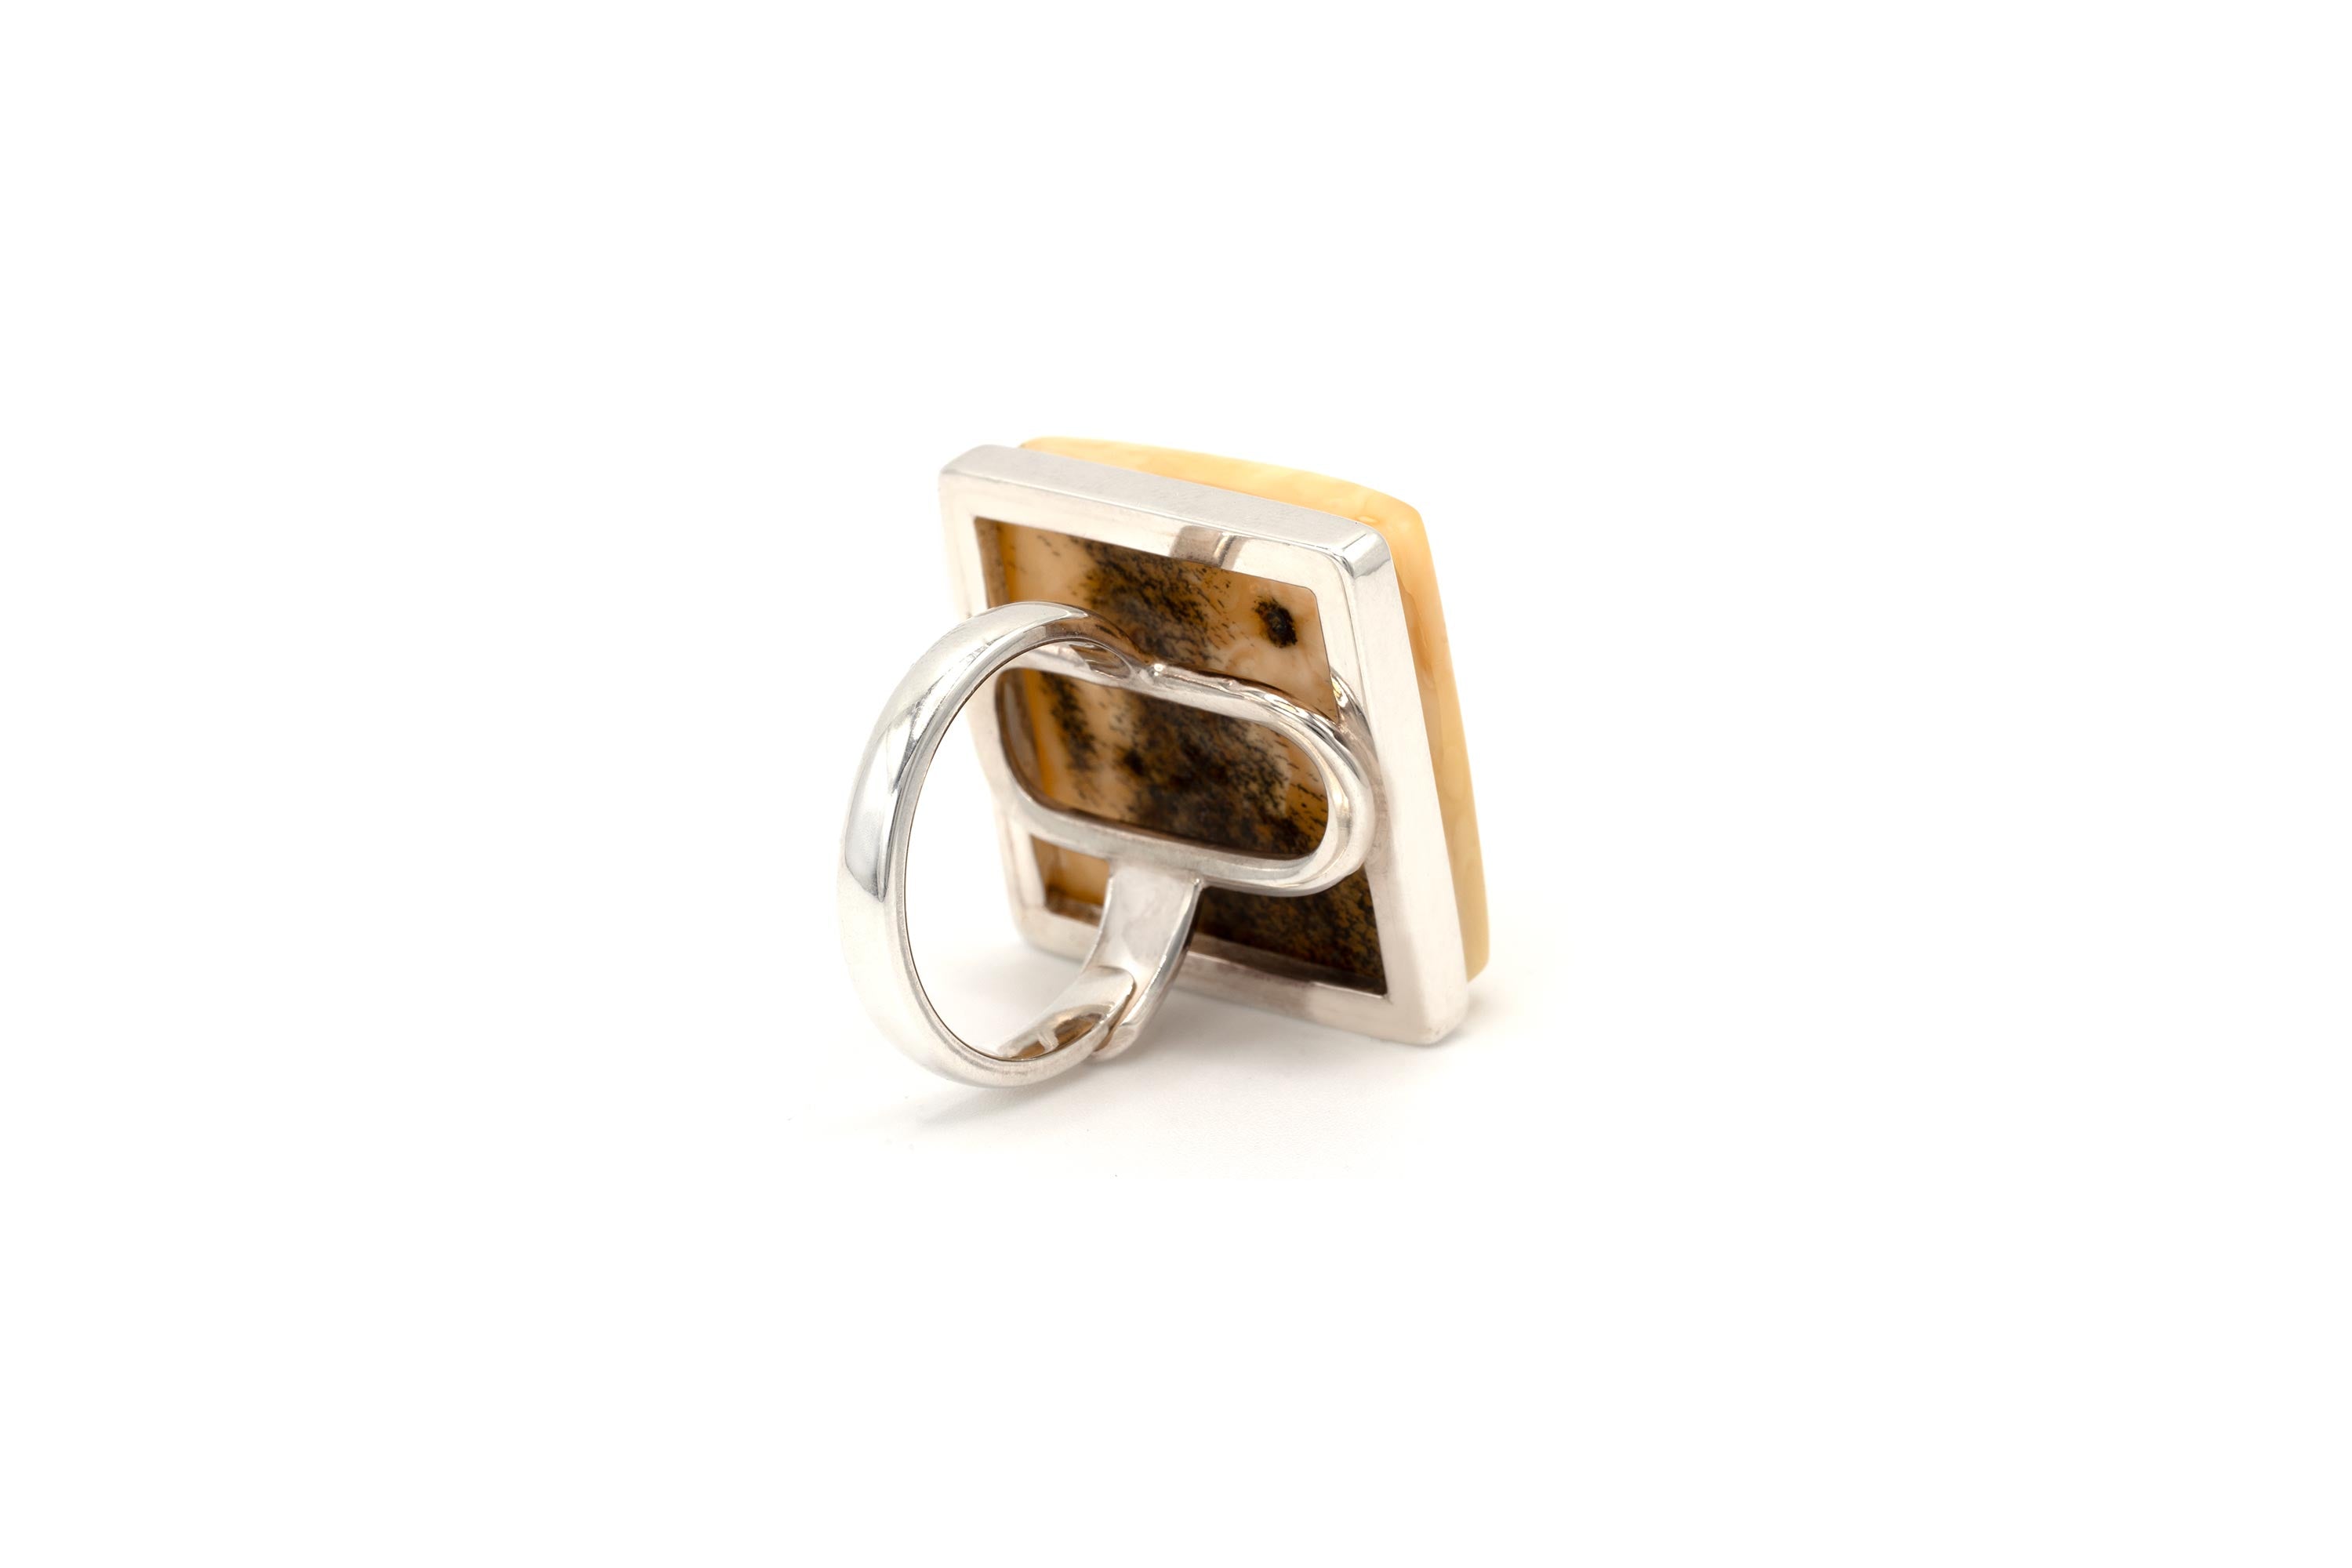 Square Yellow Amber Ring - Baltic Beauty